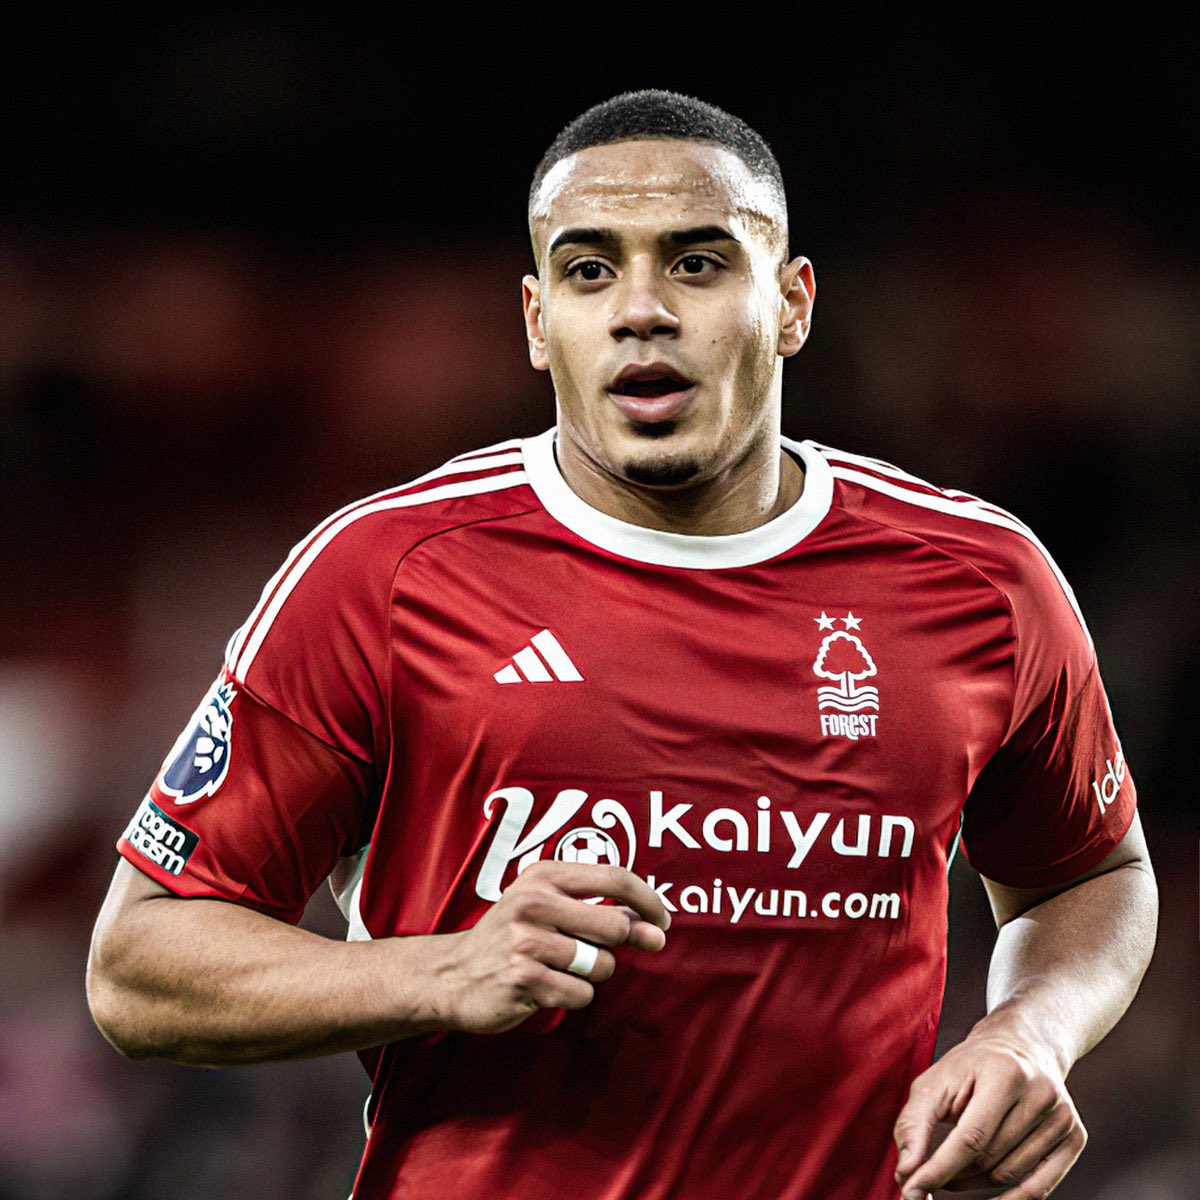 Murillo, who arrived from Brazil after just a few games as a professional, is an absolute gem 💎

Nottingham Forest have found a diamond in their Player Of The Season and we all hope to see him at the City Ground next season 🇧🇷 #NFFC